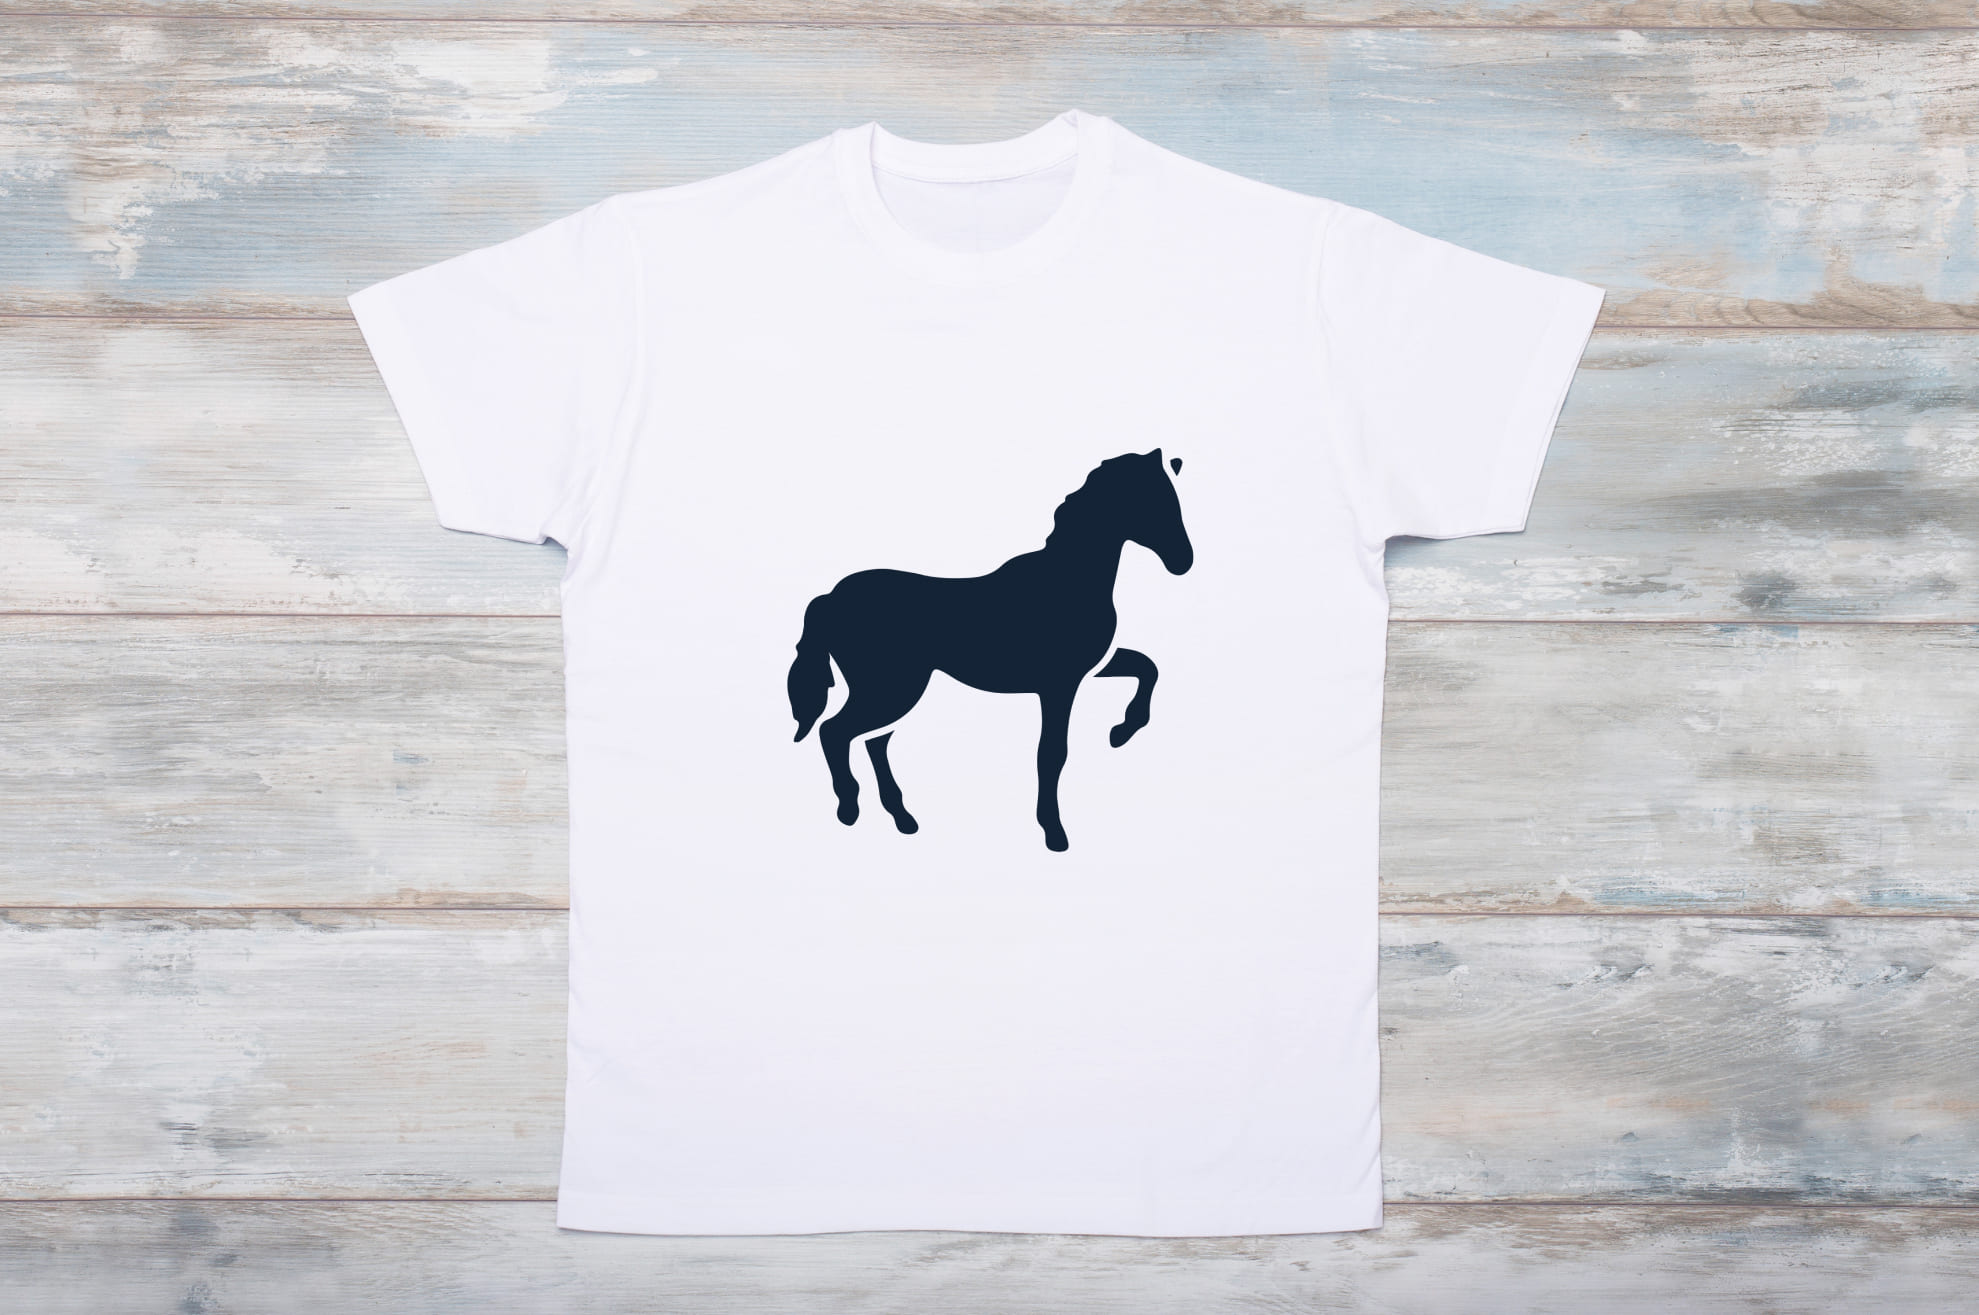 White t-shirt with a black silhouette of a horse on the wooden background.